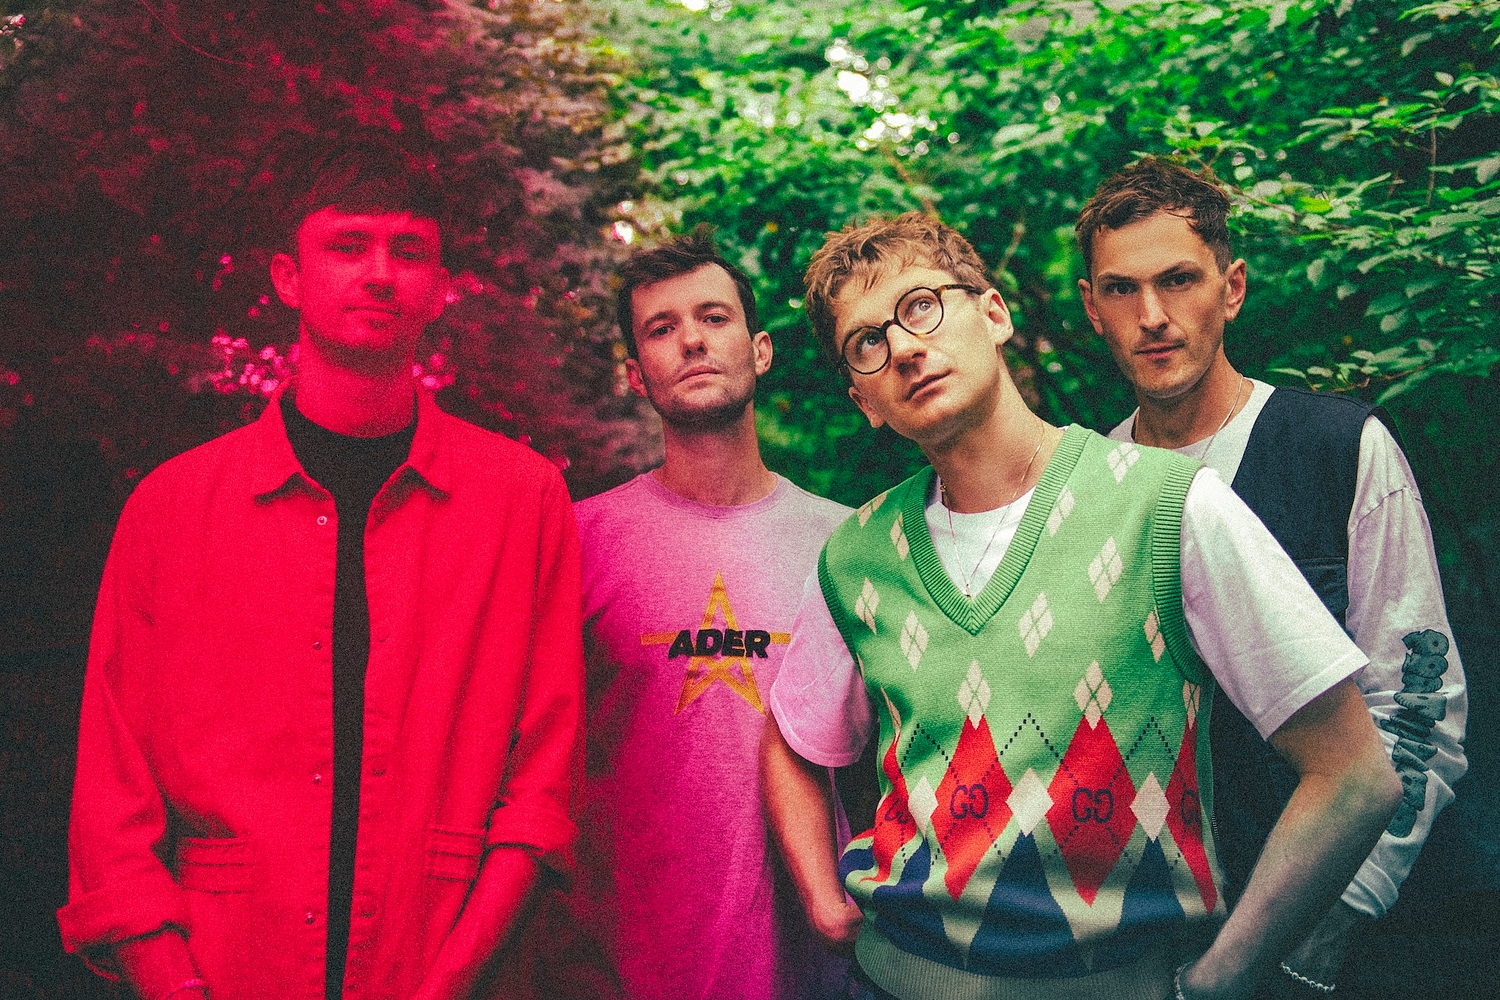 Watch Glass Animals perform ‘I Don’t Wanna Talk (I Just Wanna Dance)’ on The Late Late Show